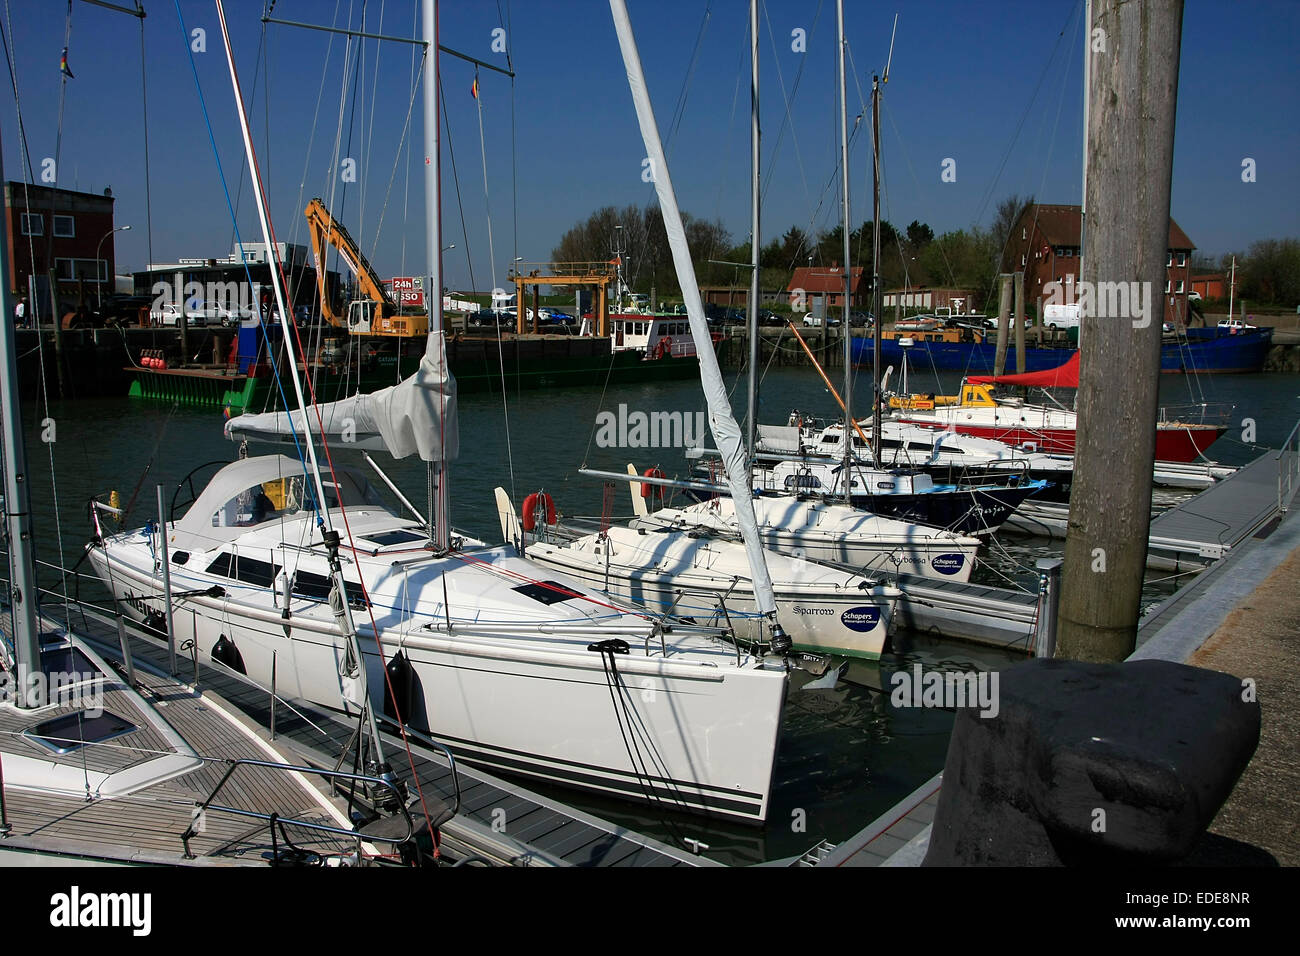 Marina of Wyk. Wyk is a town on Foehr island in the district of North Friesland, in Schleswig-Holstein. Photo: Klaus Nowottnick Date: April 20, 2014 Stock Photo